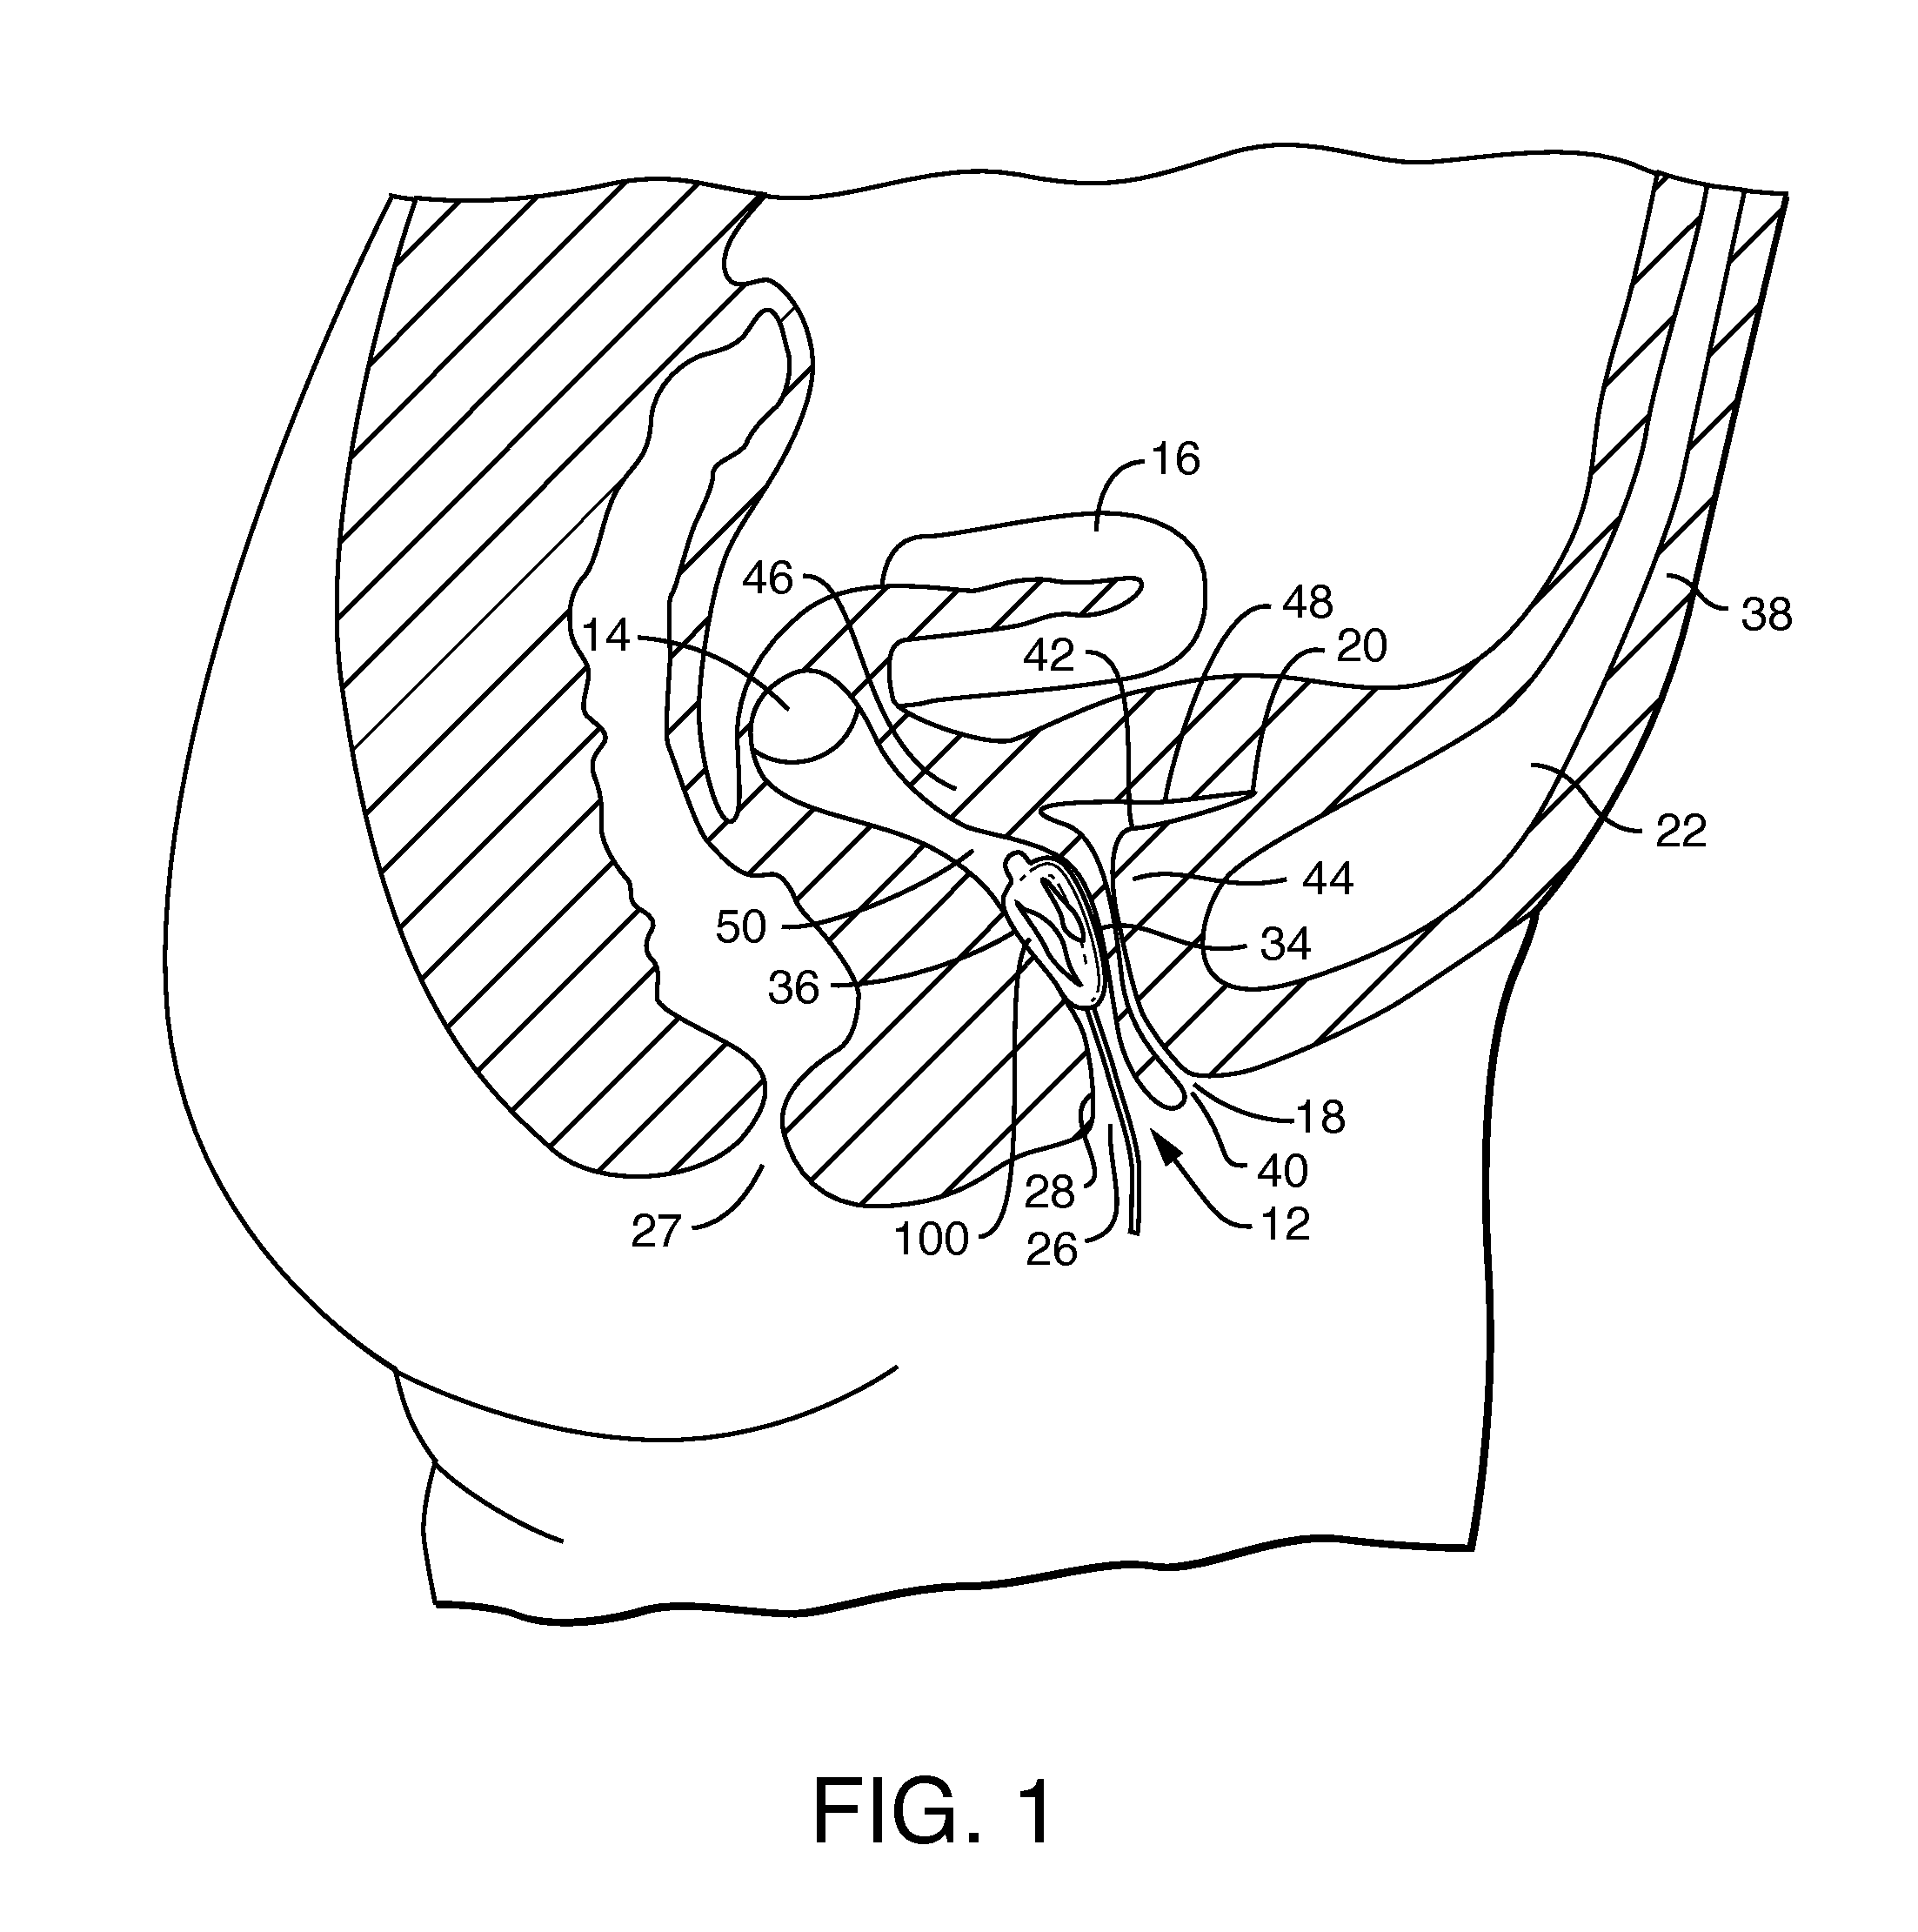 Vaginal Insert Device Having a Support Portion with Plurality of Struts